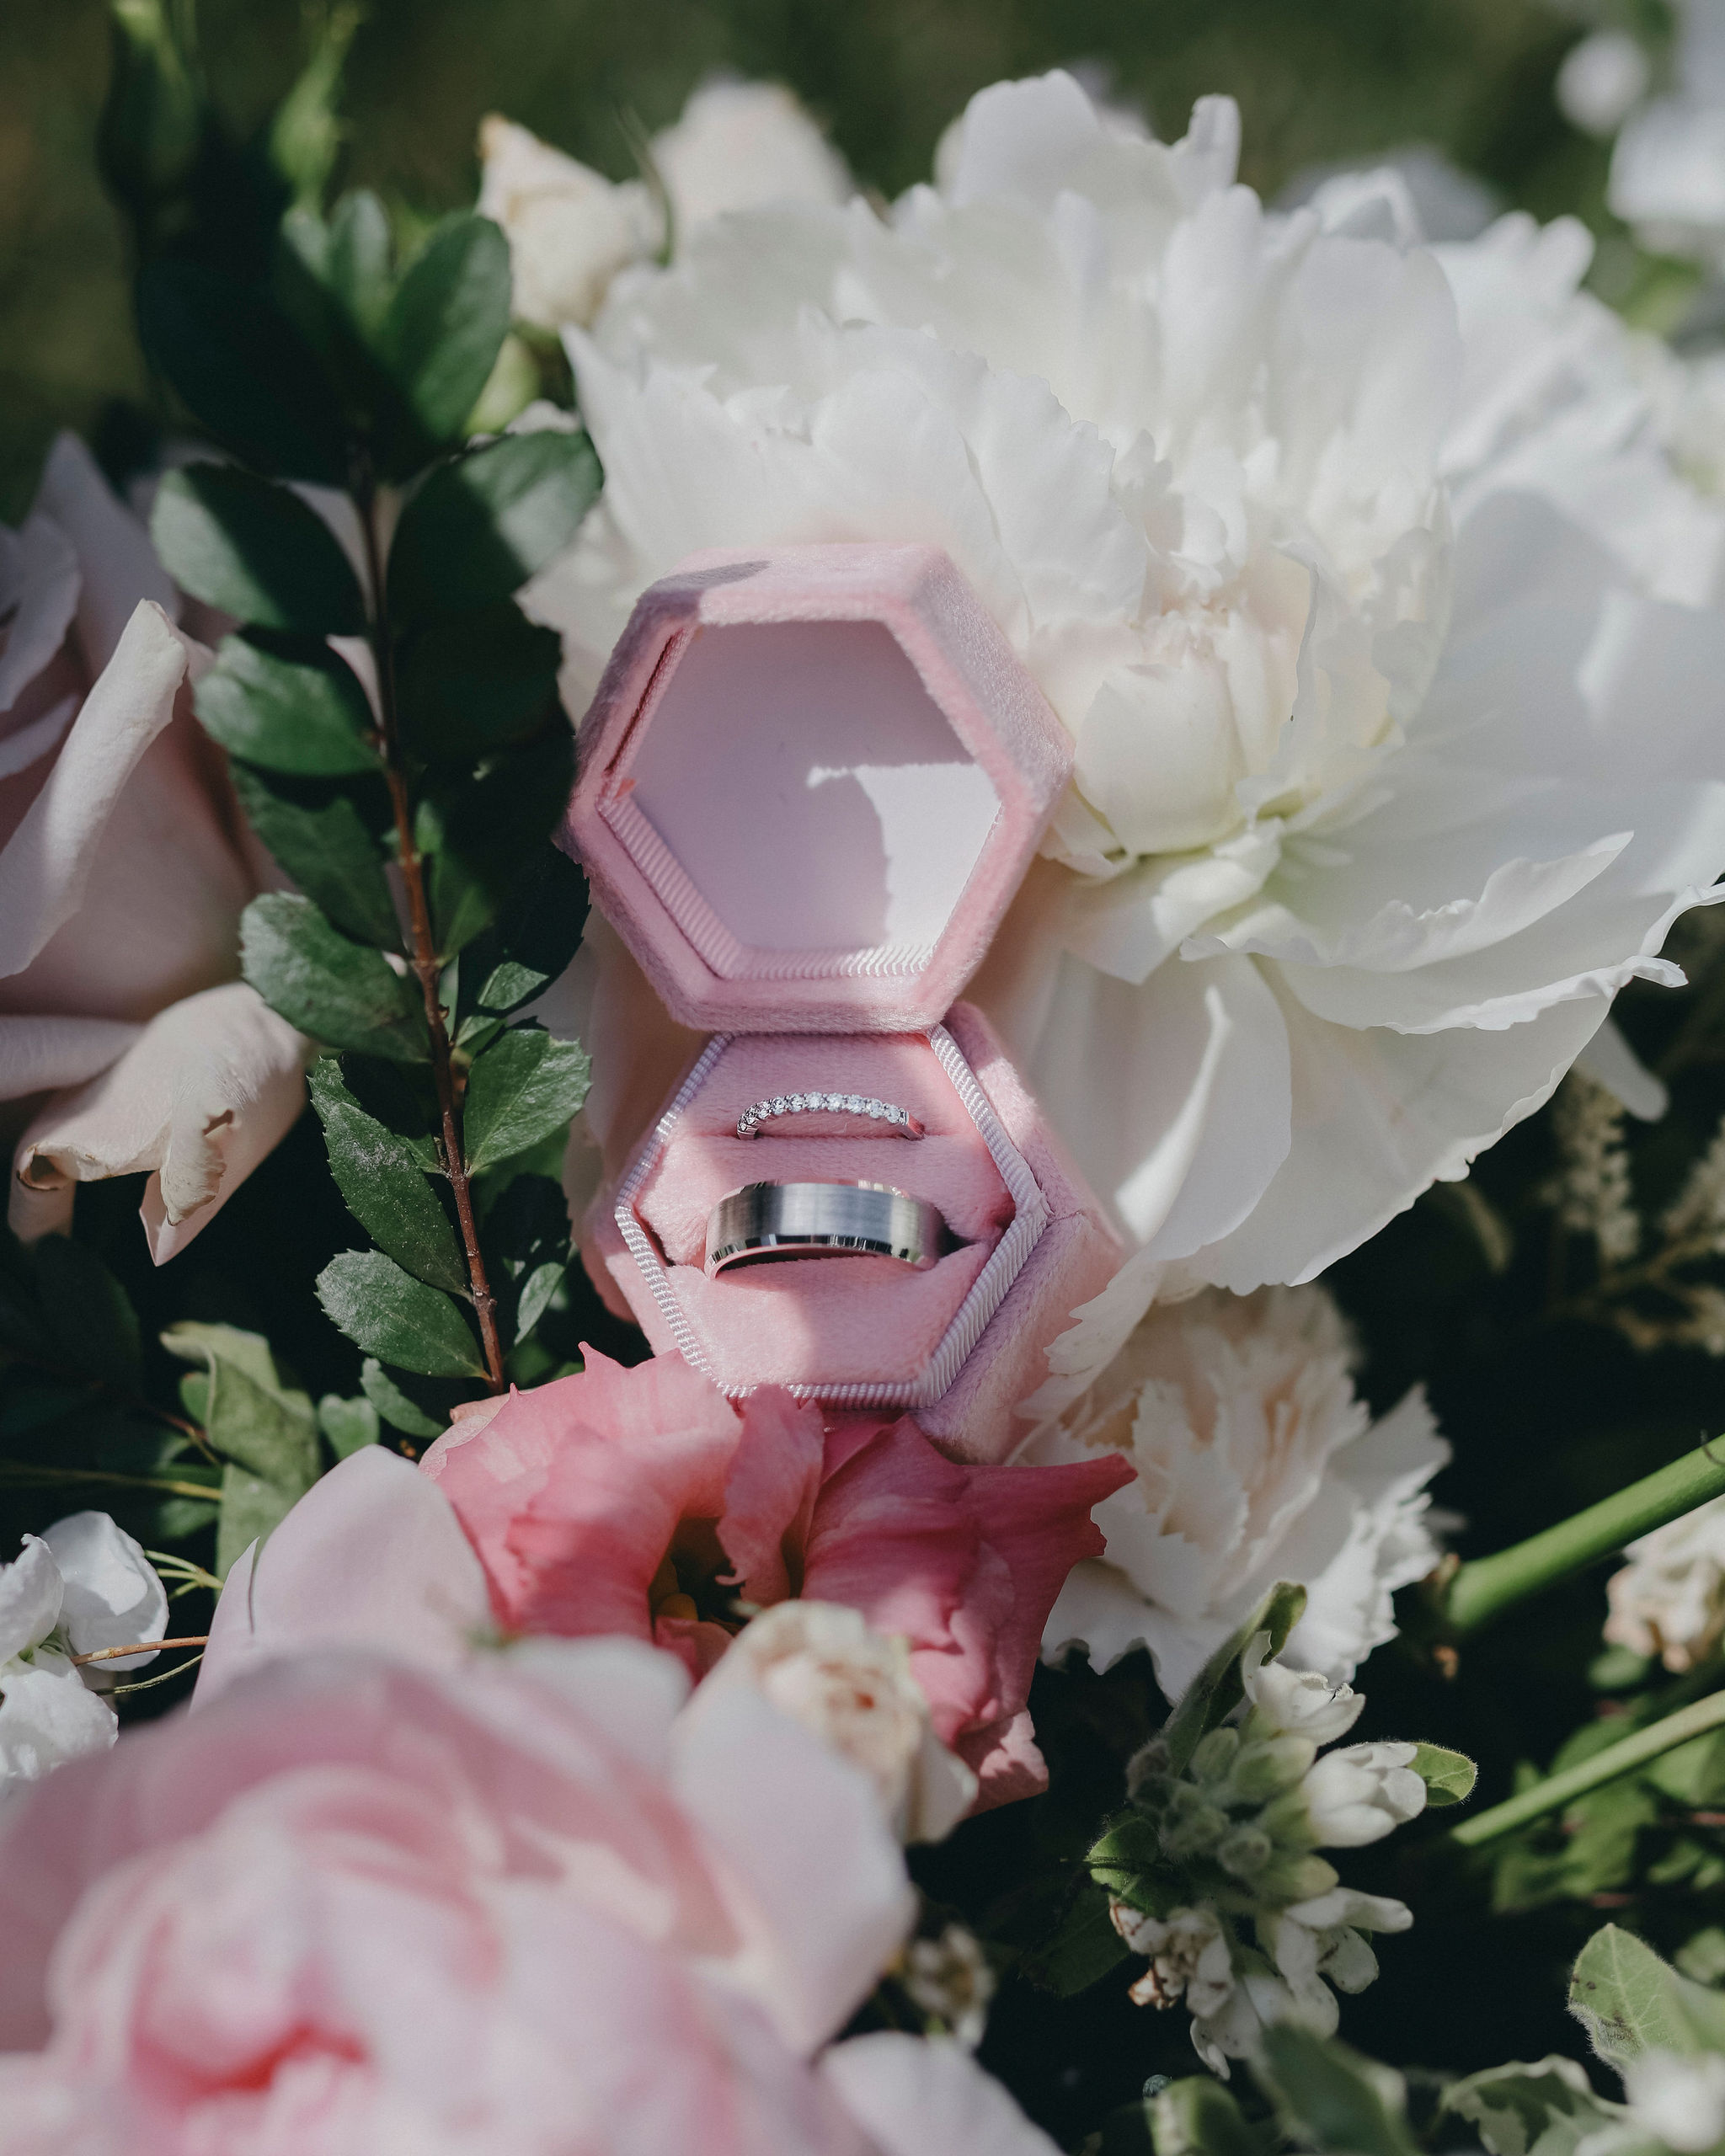 Ring in a pink ring box sitting in white and pink flowers.